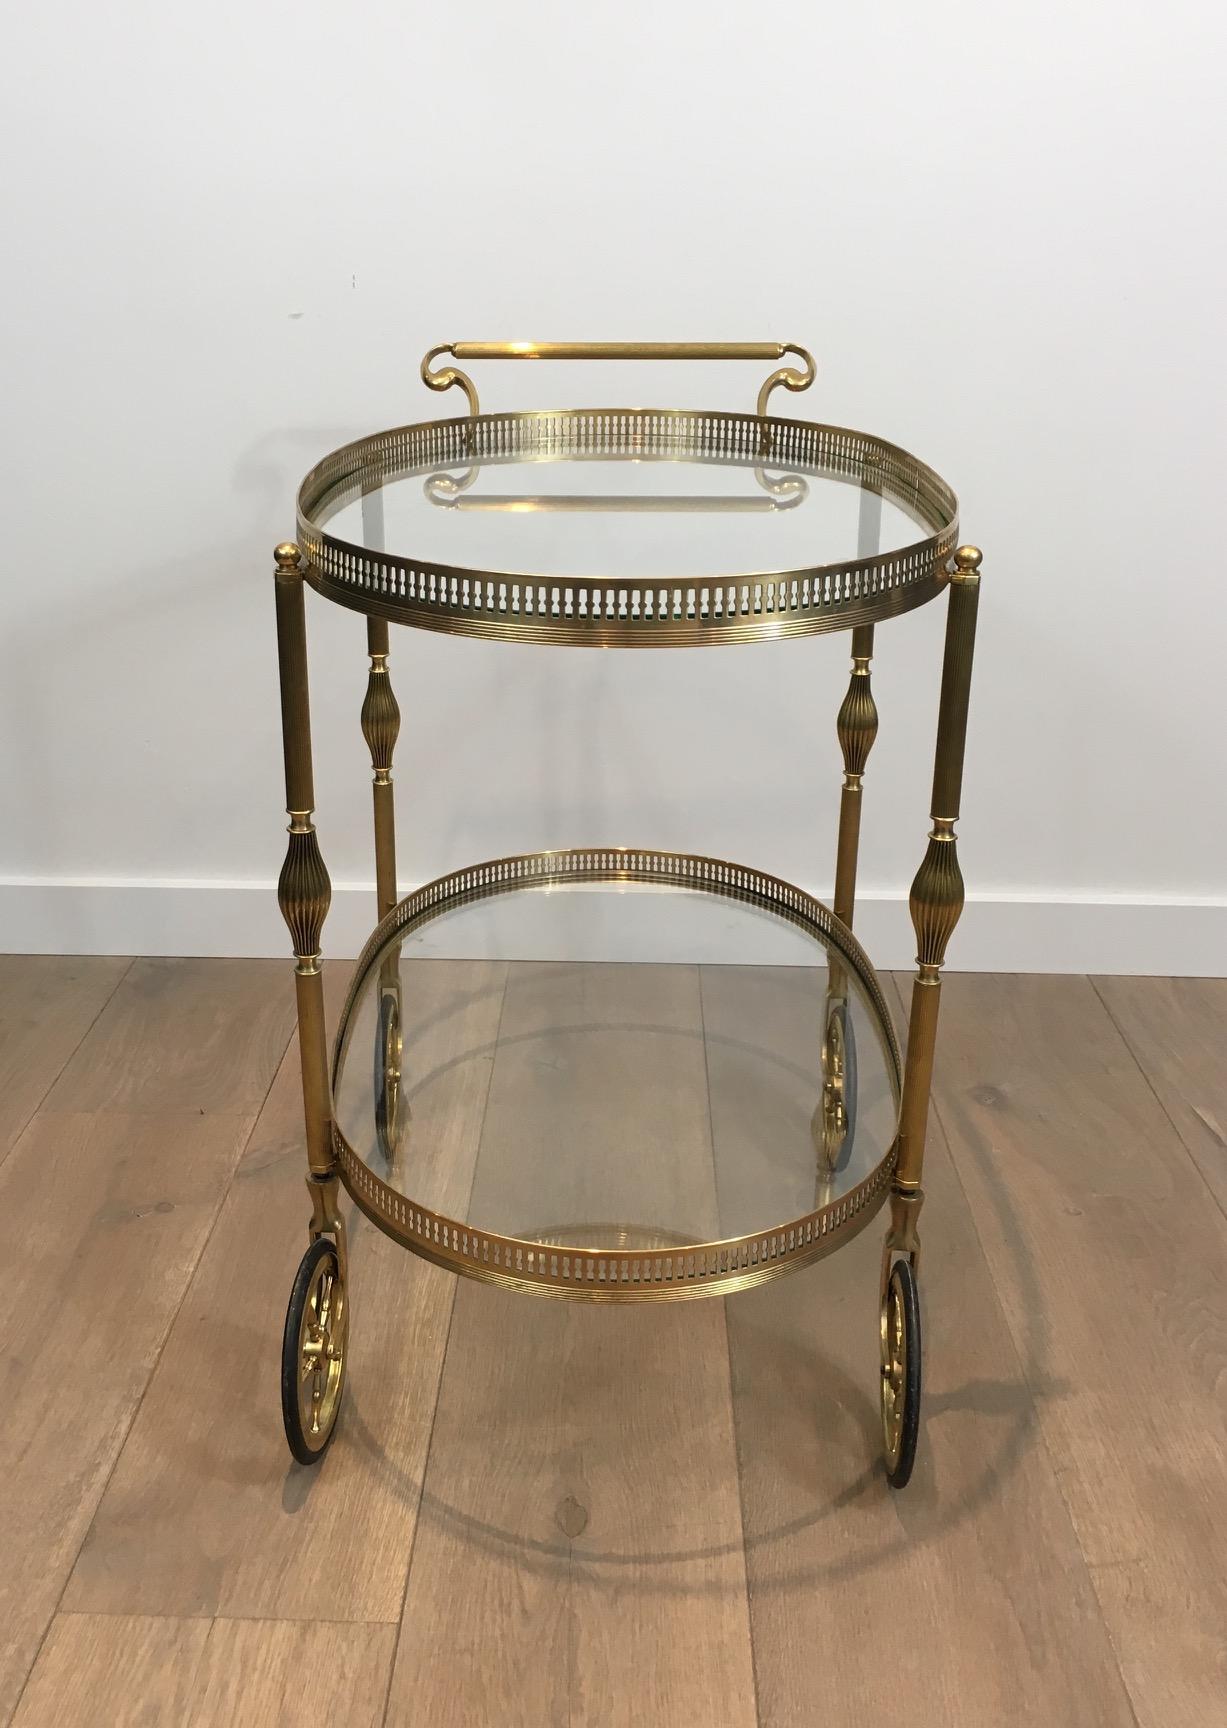 Neoclassical Oval Brass Bar Cart, French, circa 1940 For Sale 8